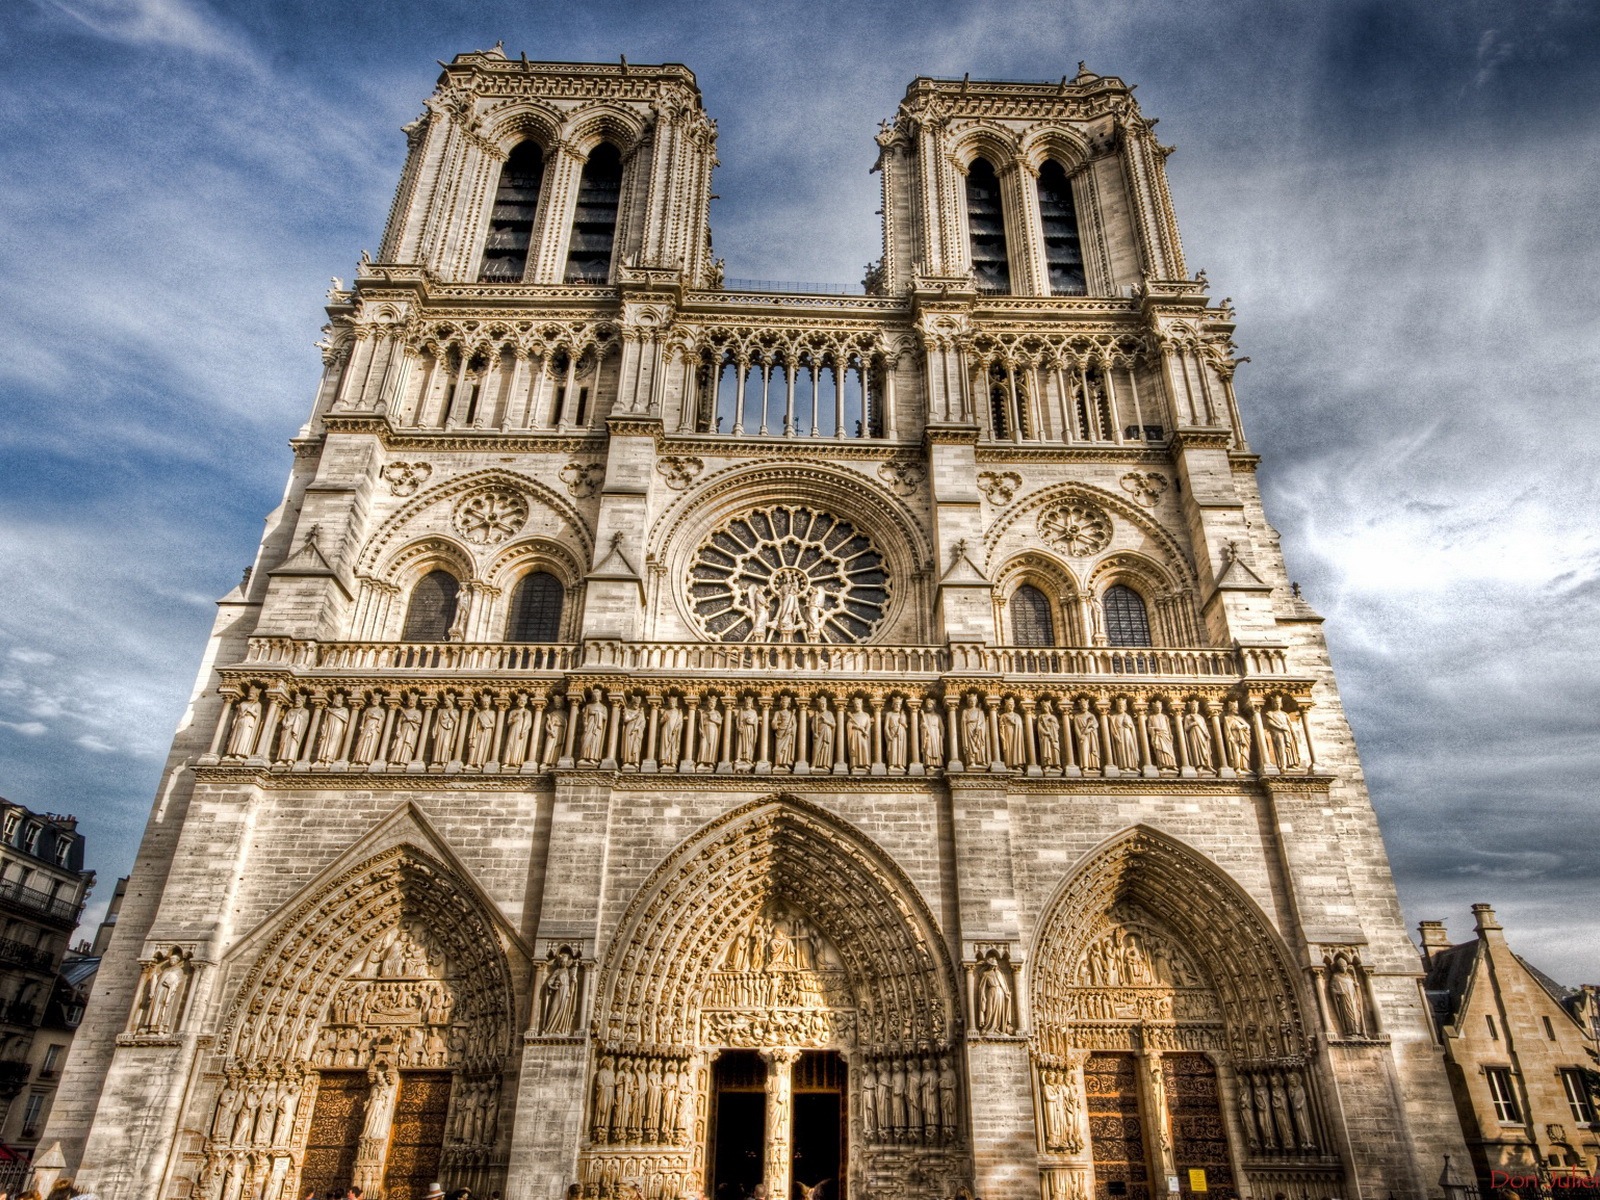 Notre Dame HD Wallpapers #14 - 1600x1200